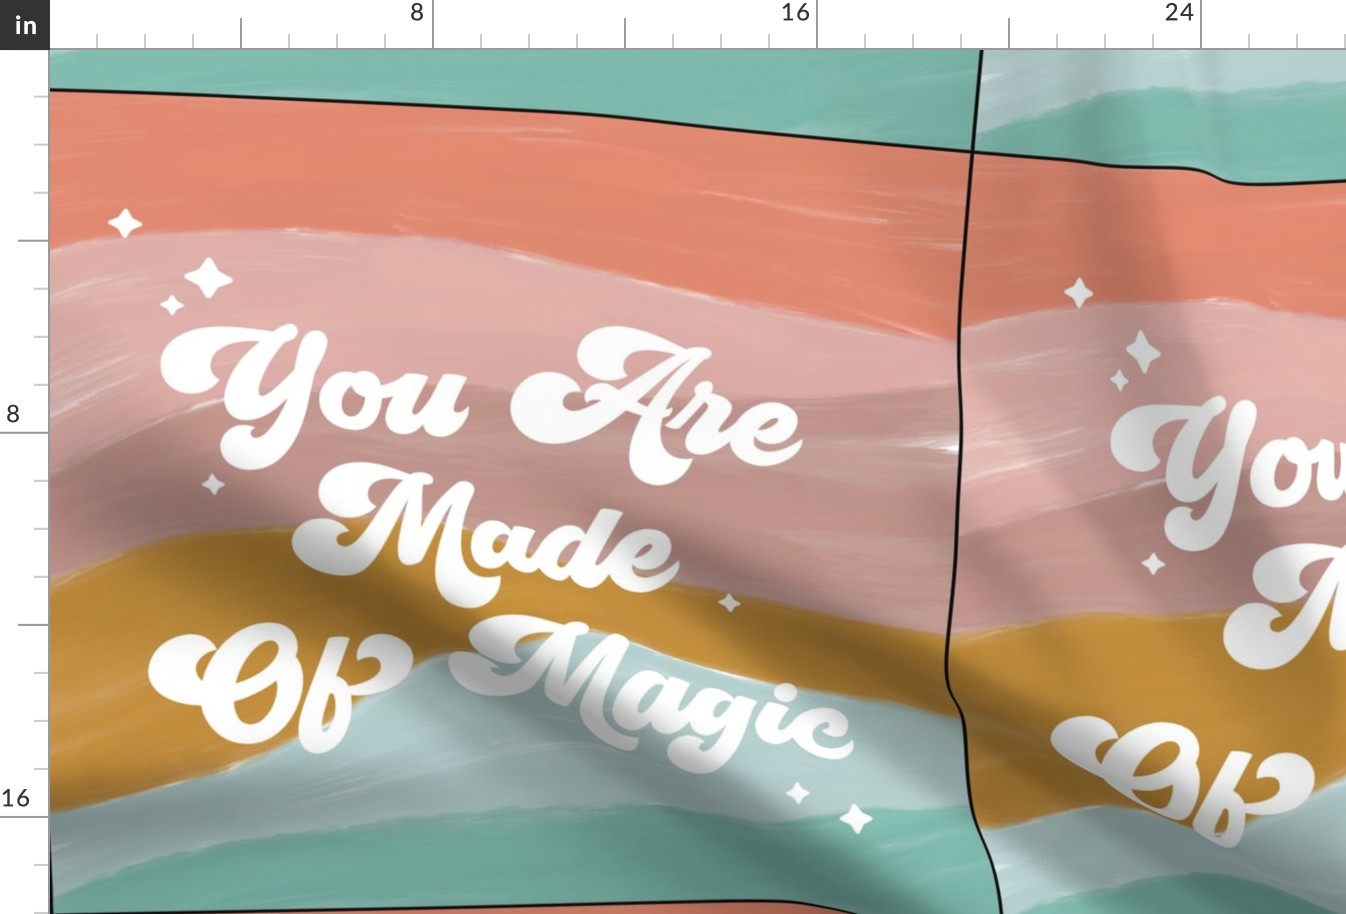 6 loveys: you are made of magic